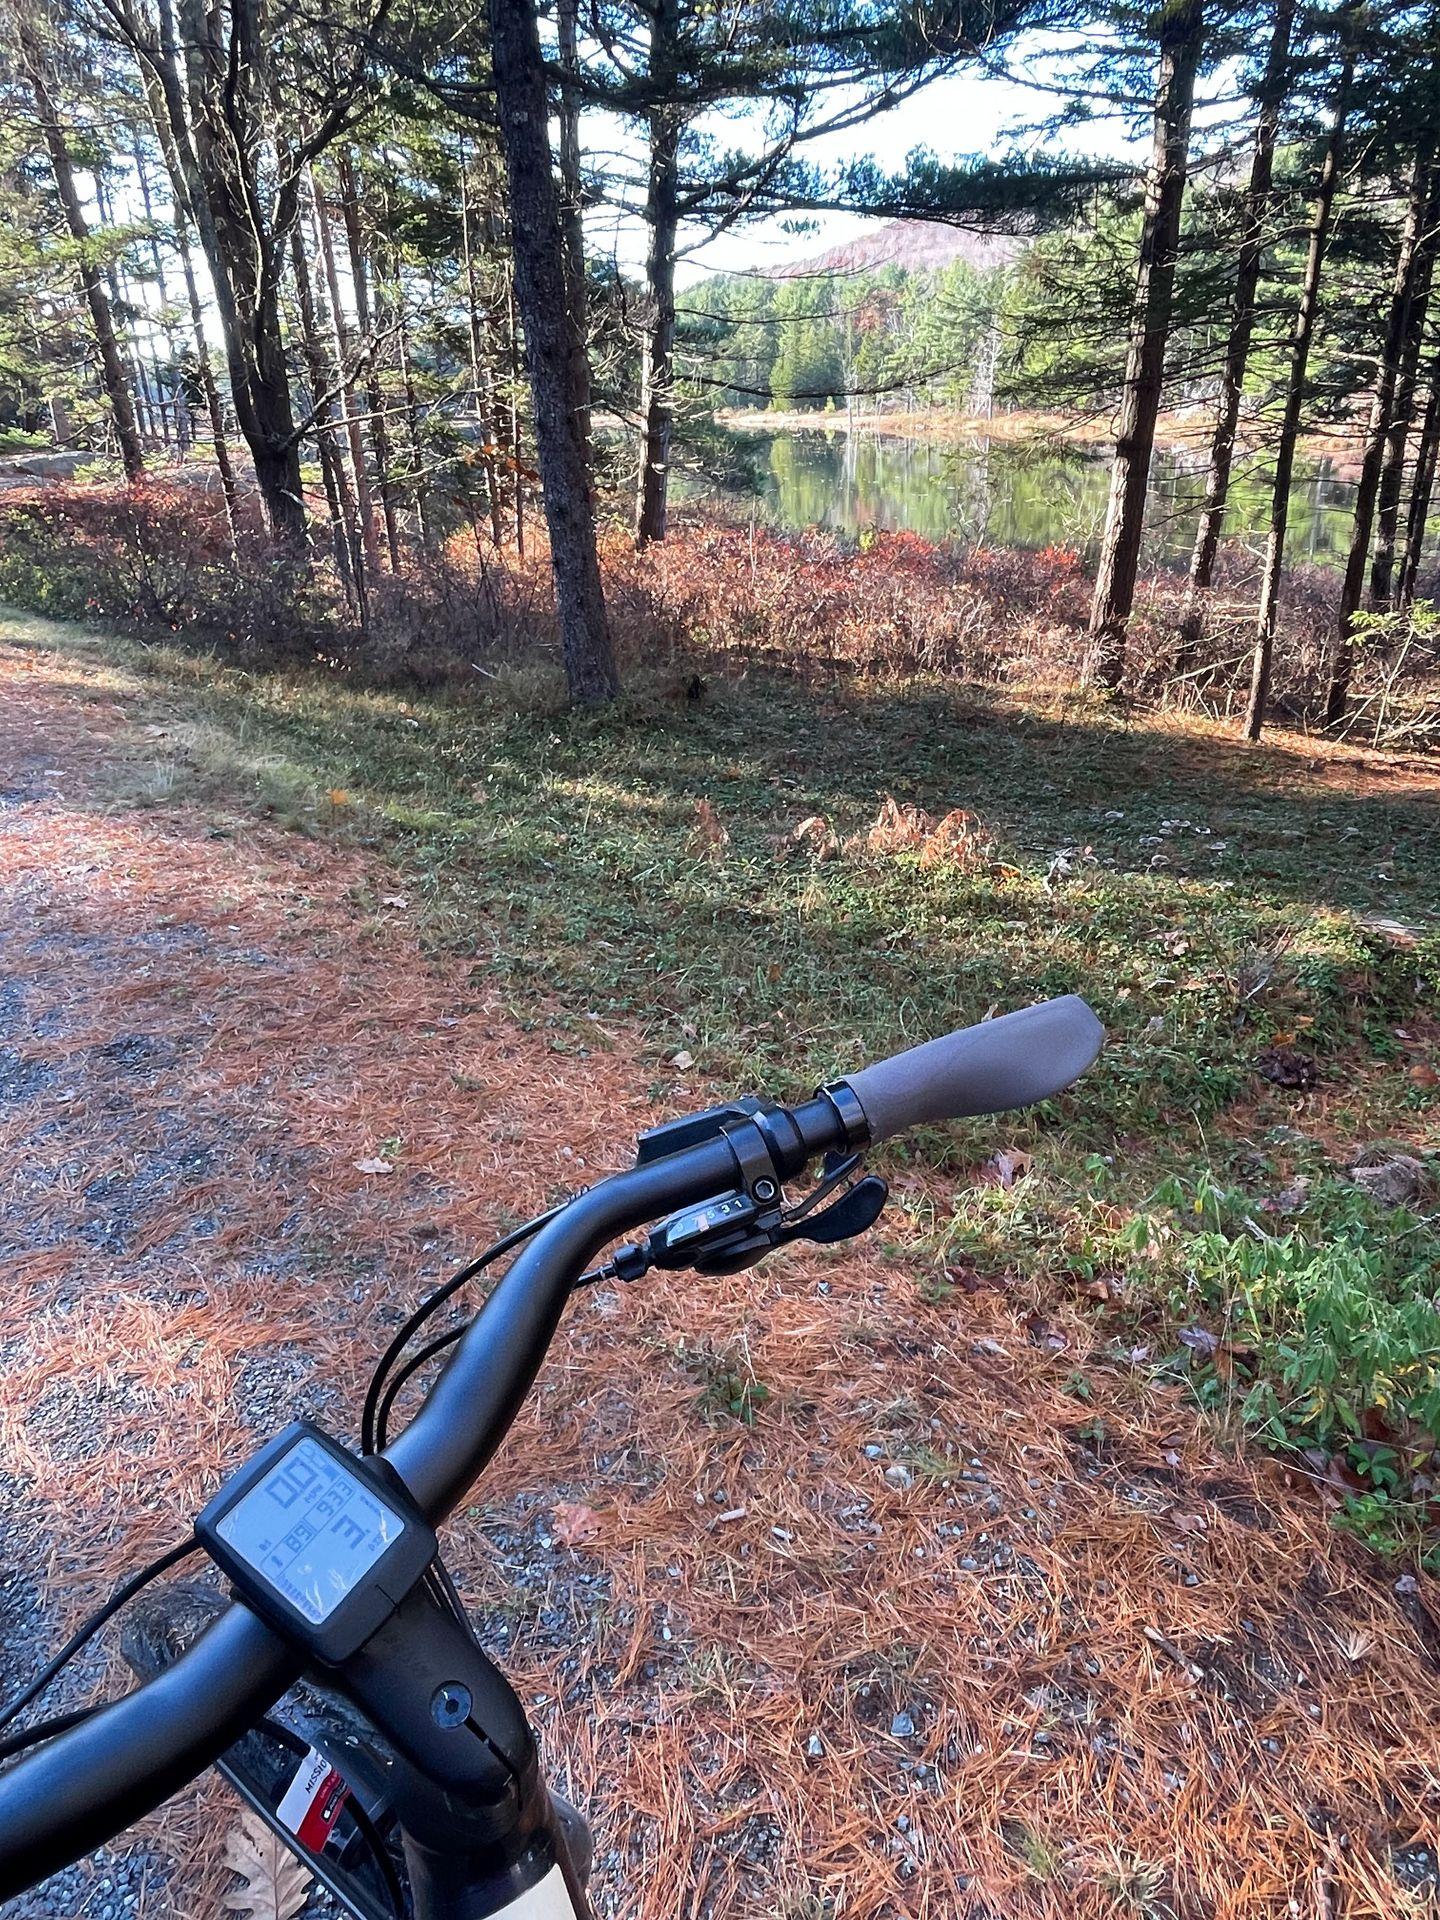 A close up view to the handlebars of an e-bike. The bike is next to some trees and a pond.